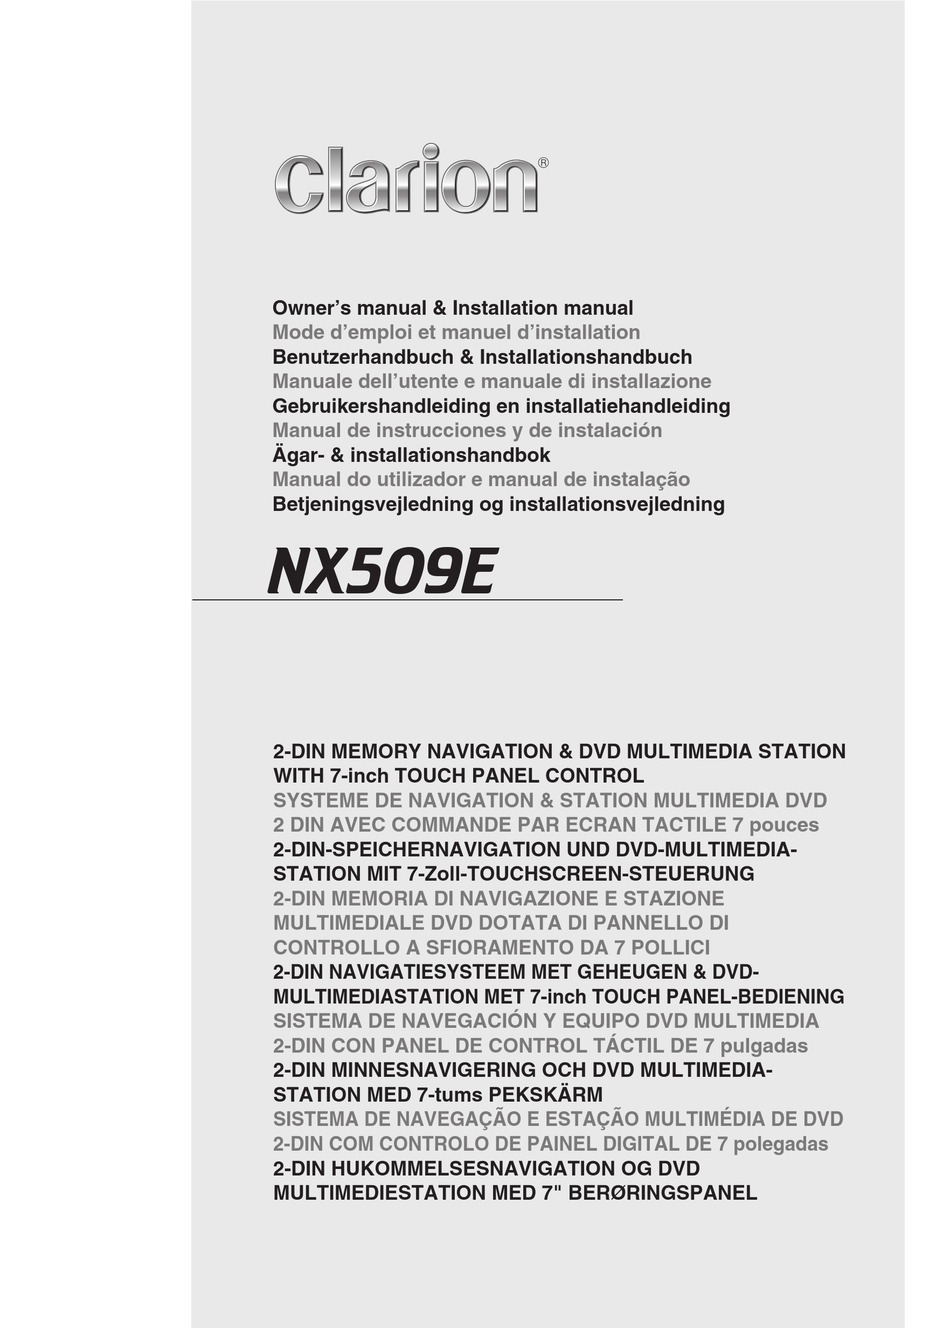 CLARION NX509E OWNER'S MANUAL & INSTALLATION INSTRUCTIONS Pdf Download